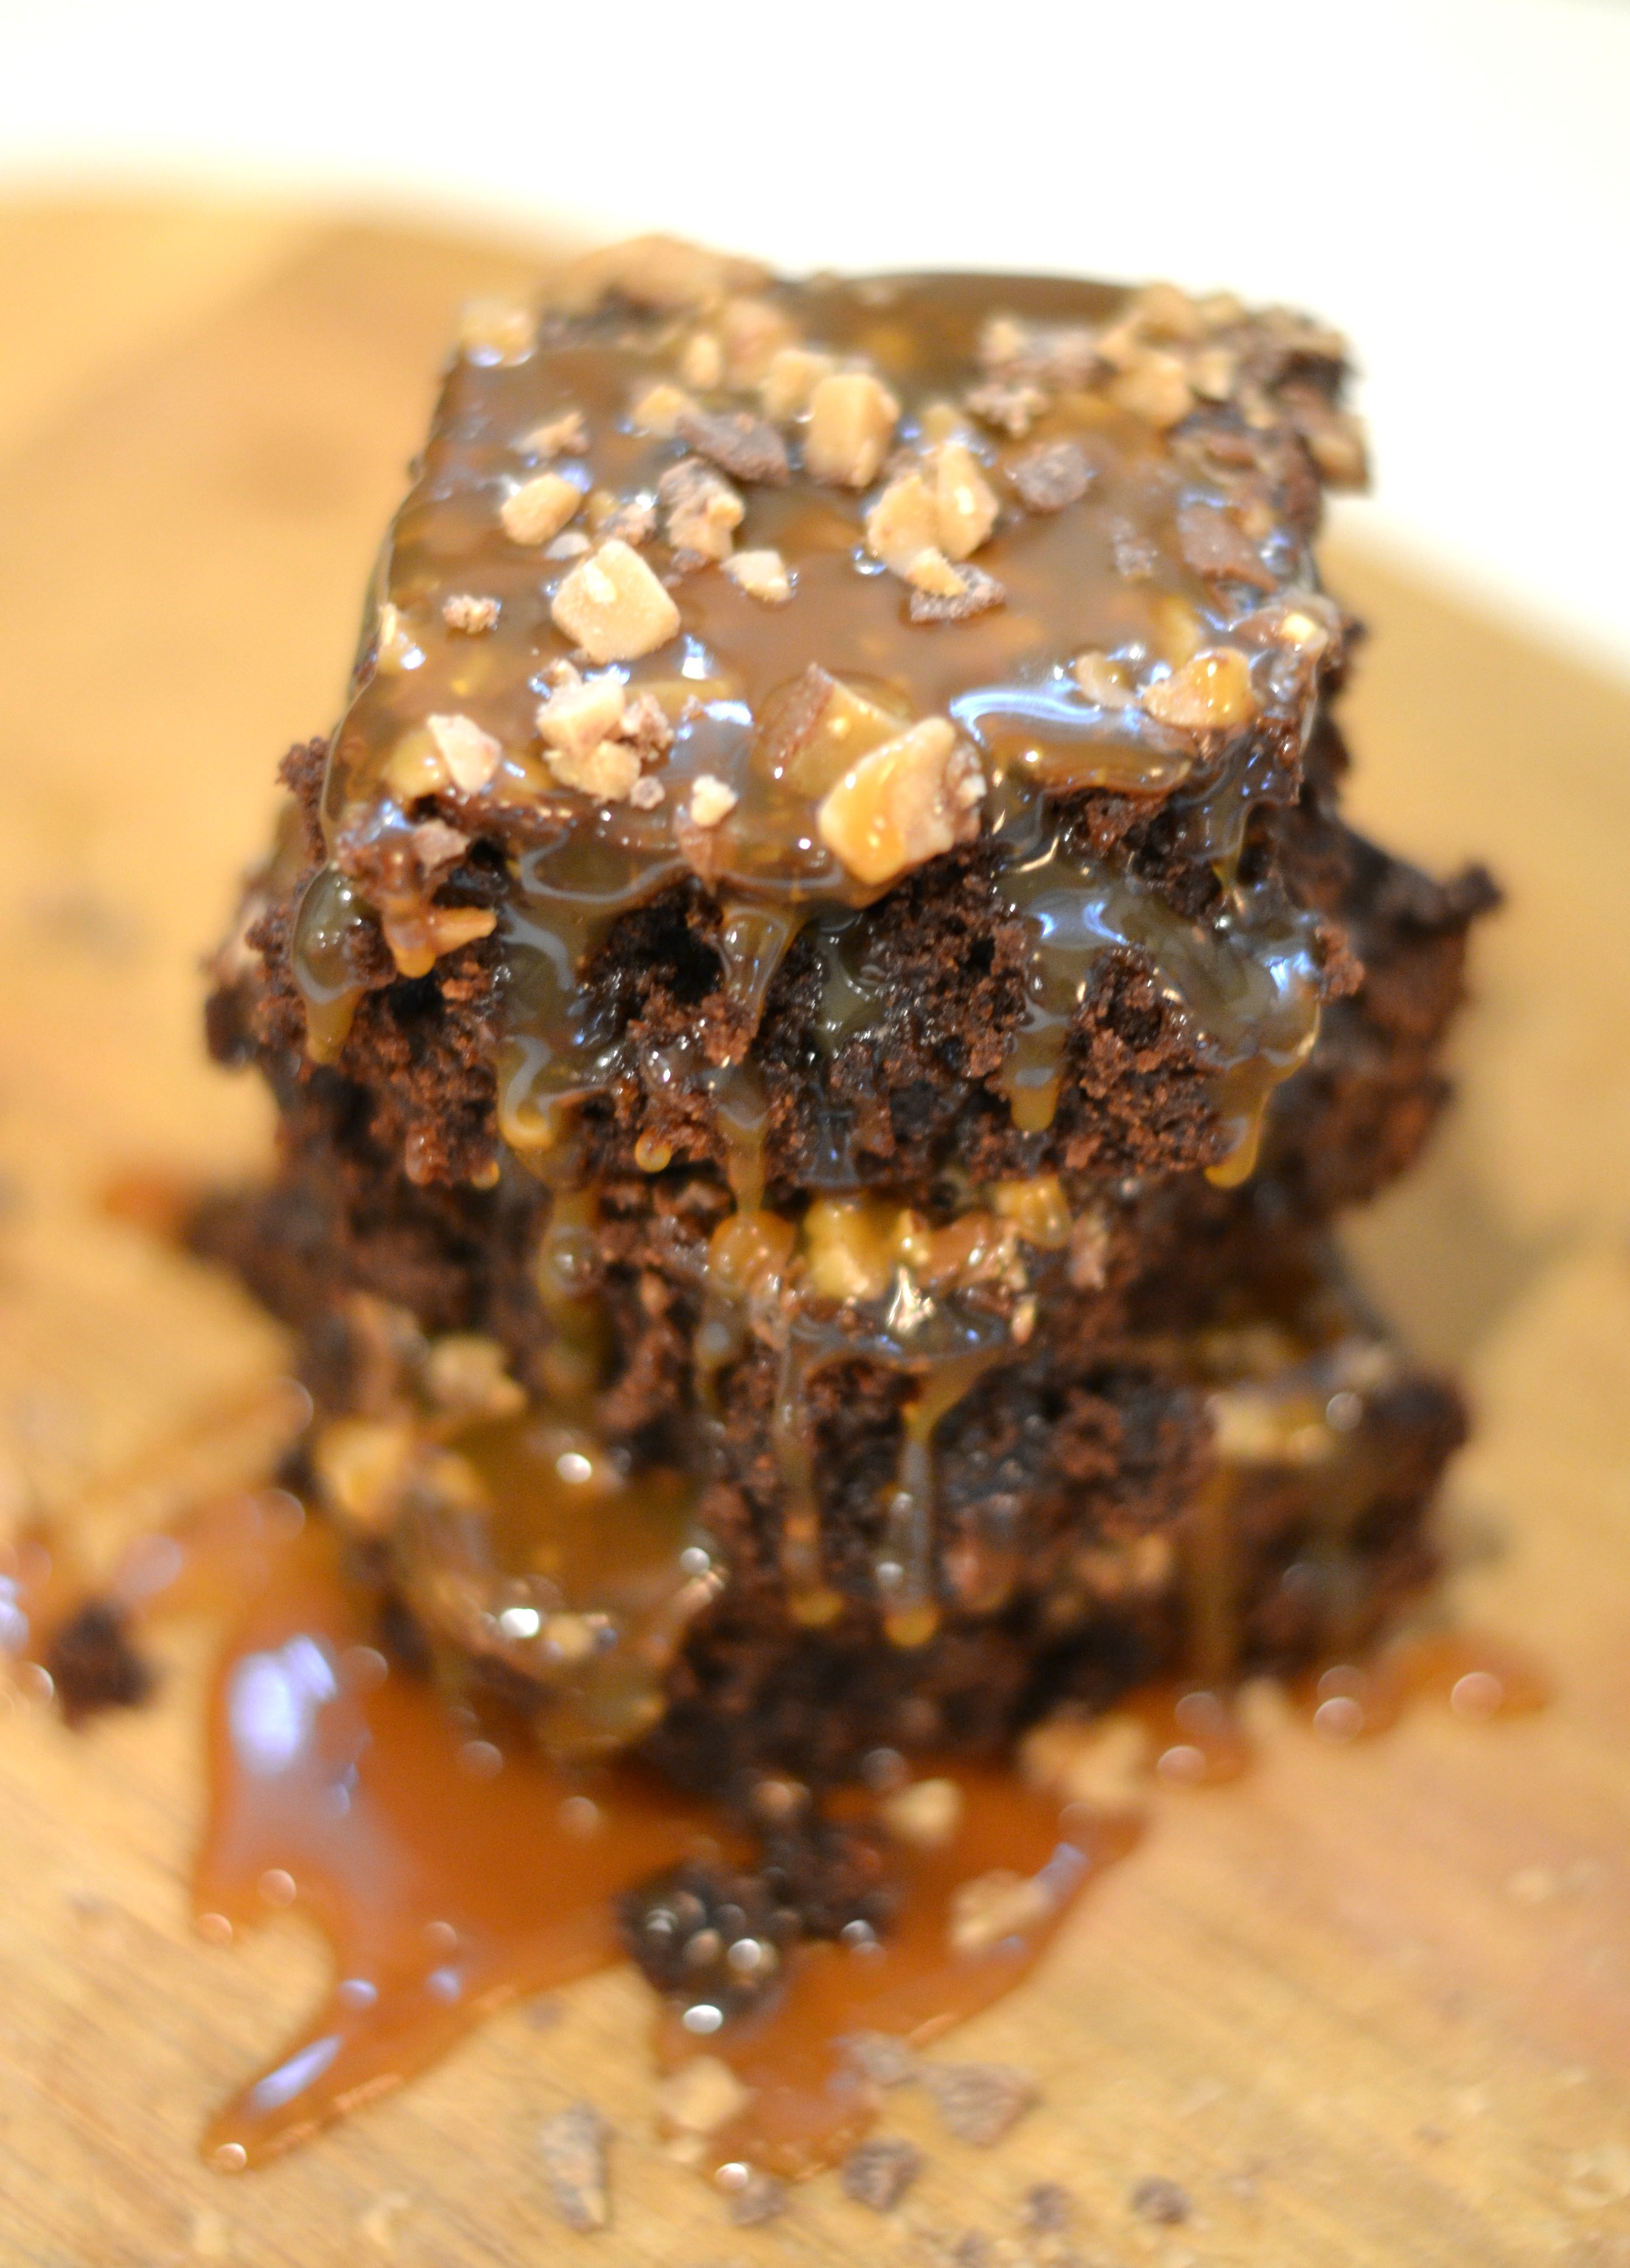 Toffee and Caramel Double Chocolate Brownies